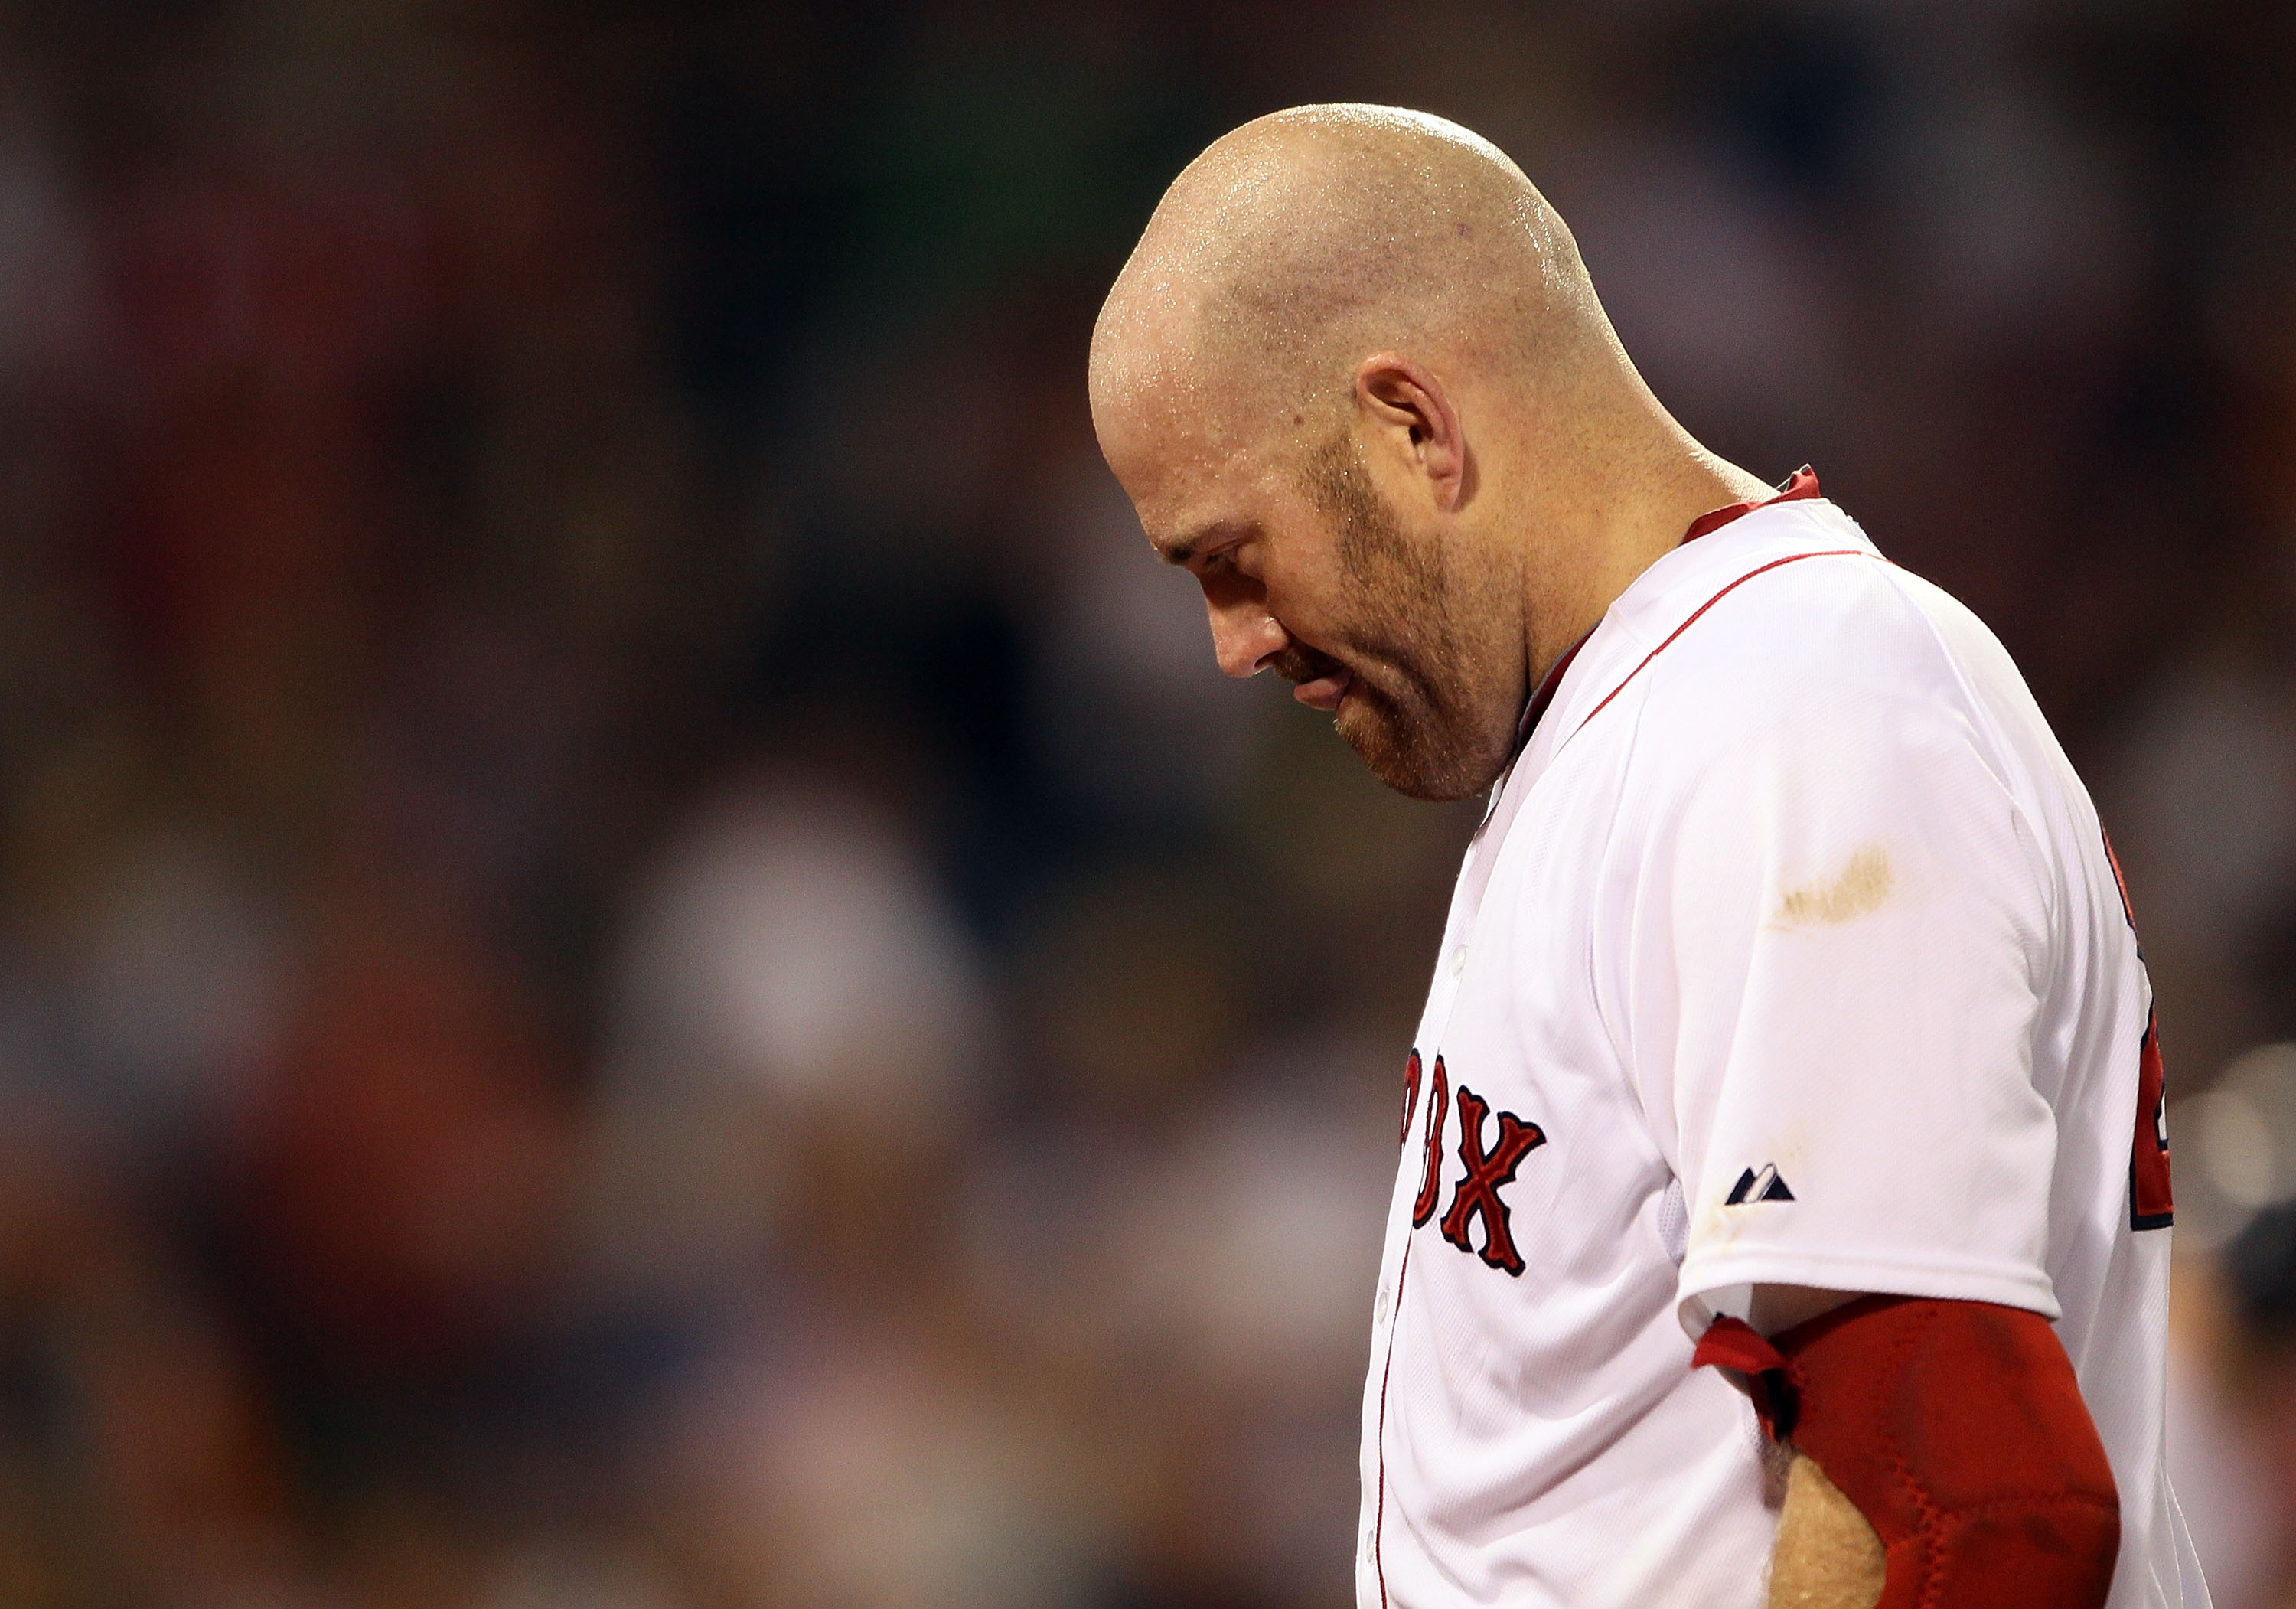 Kevin Youkilis and Nine Other Injuries That Have Derailed the Red